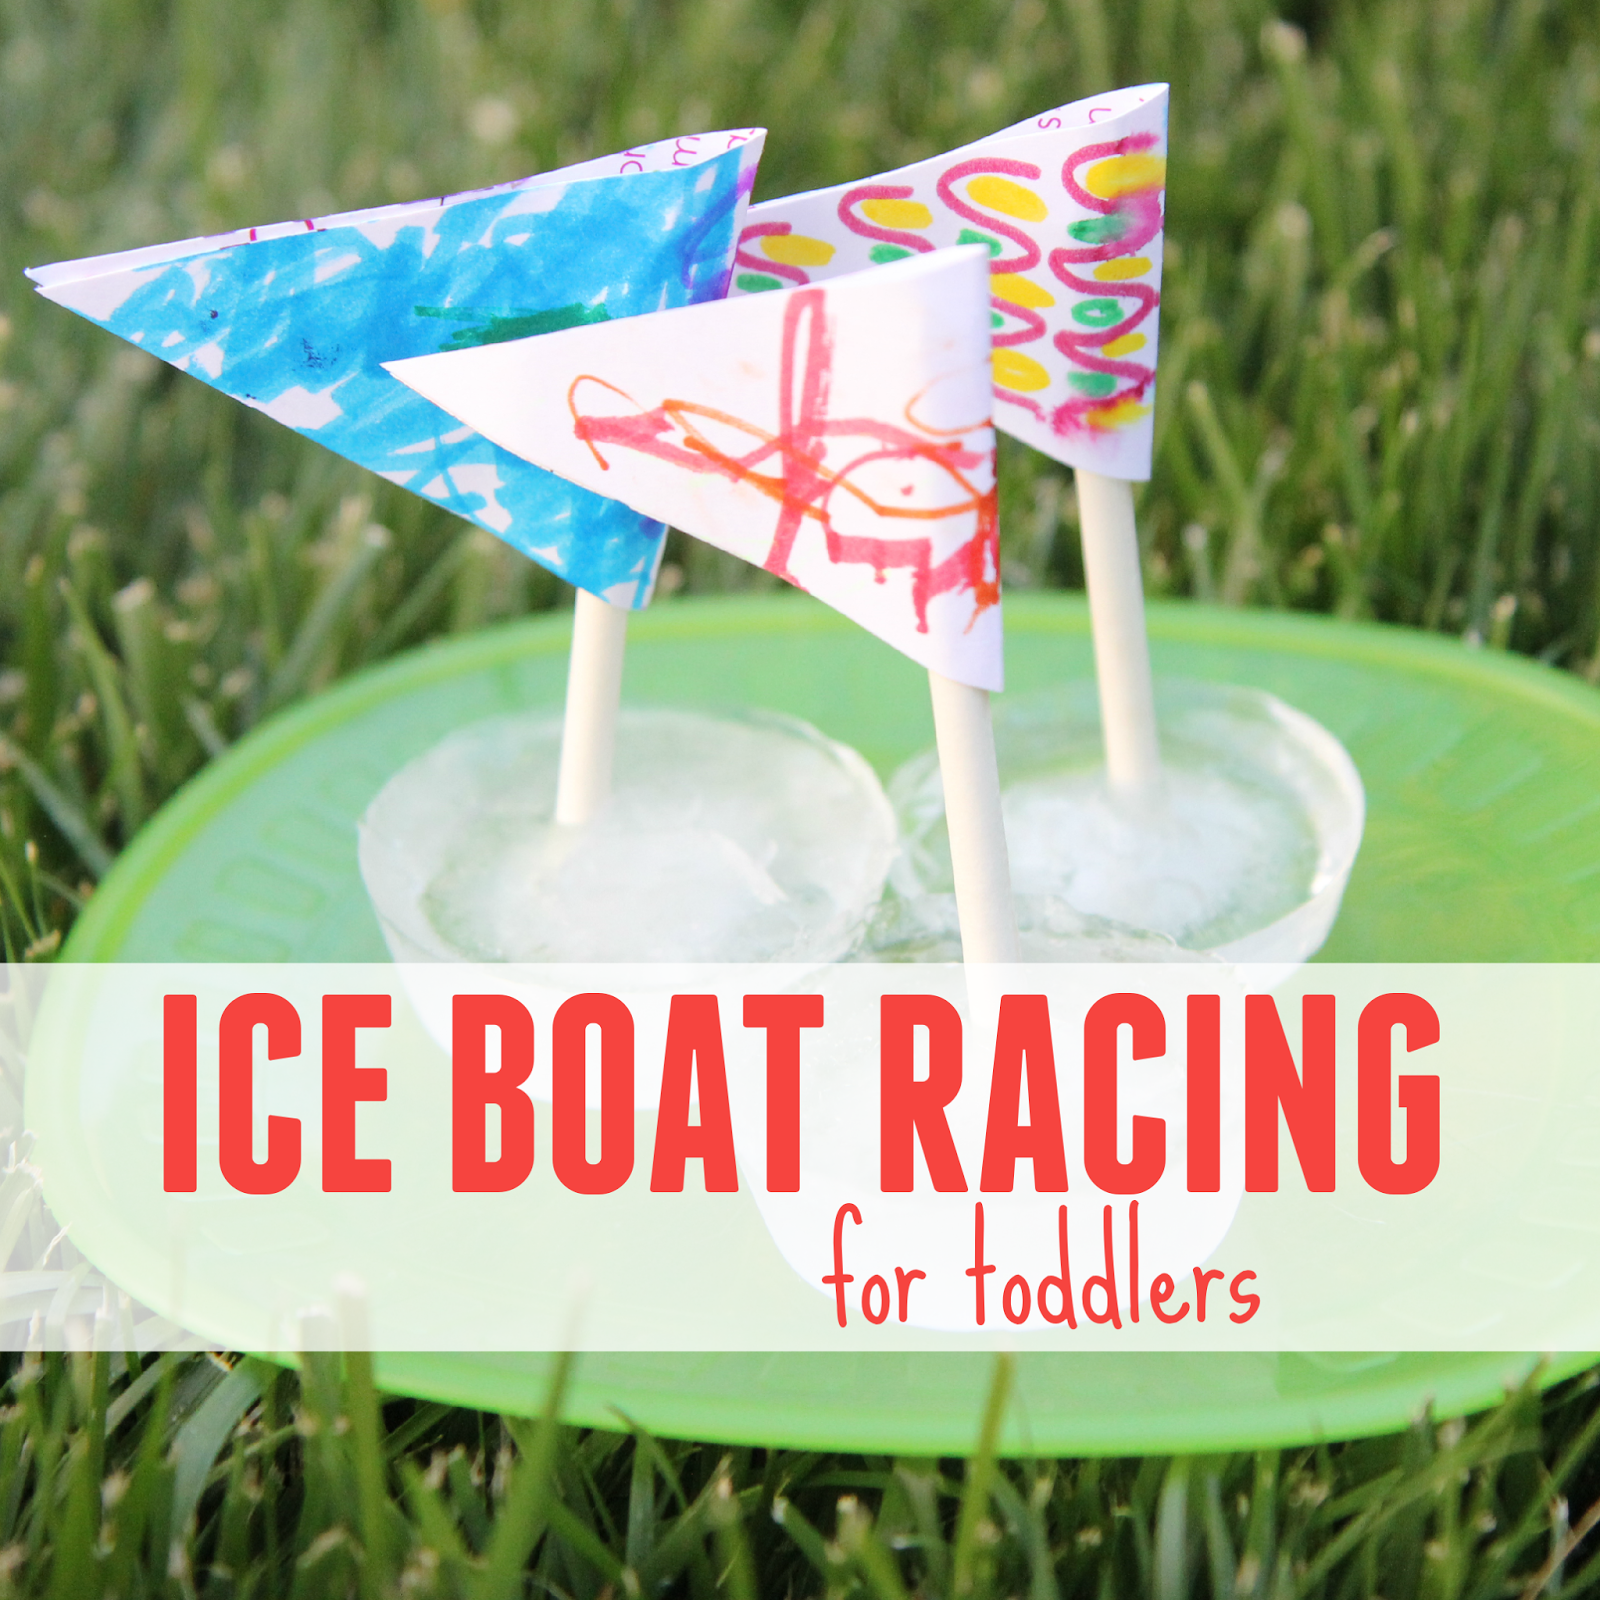 toddler approved!: ice boat racing for toddlers